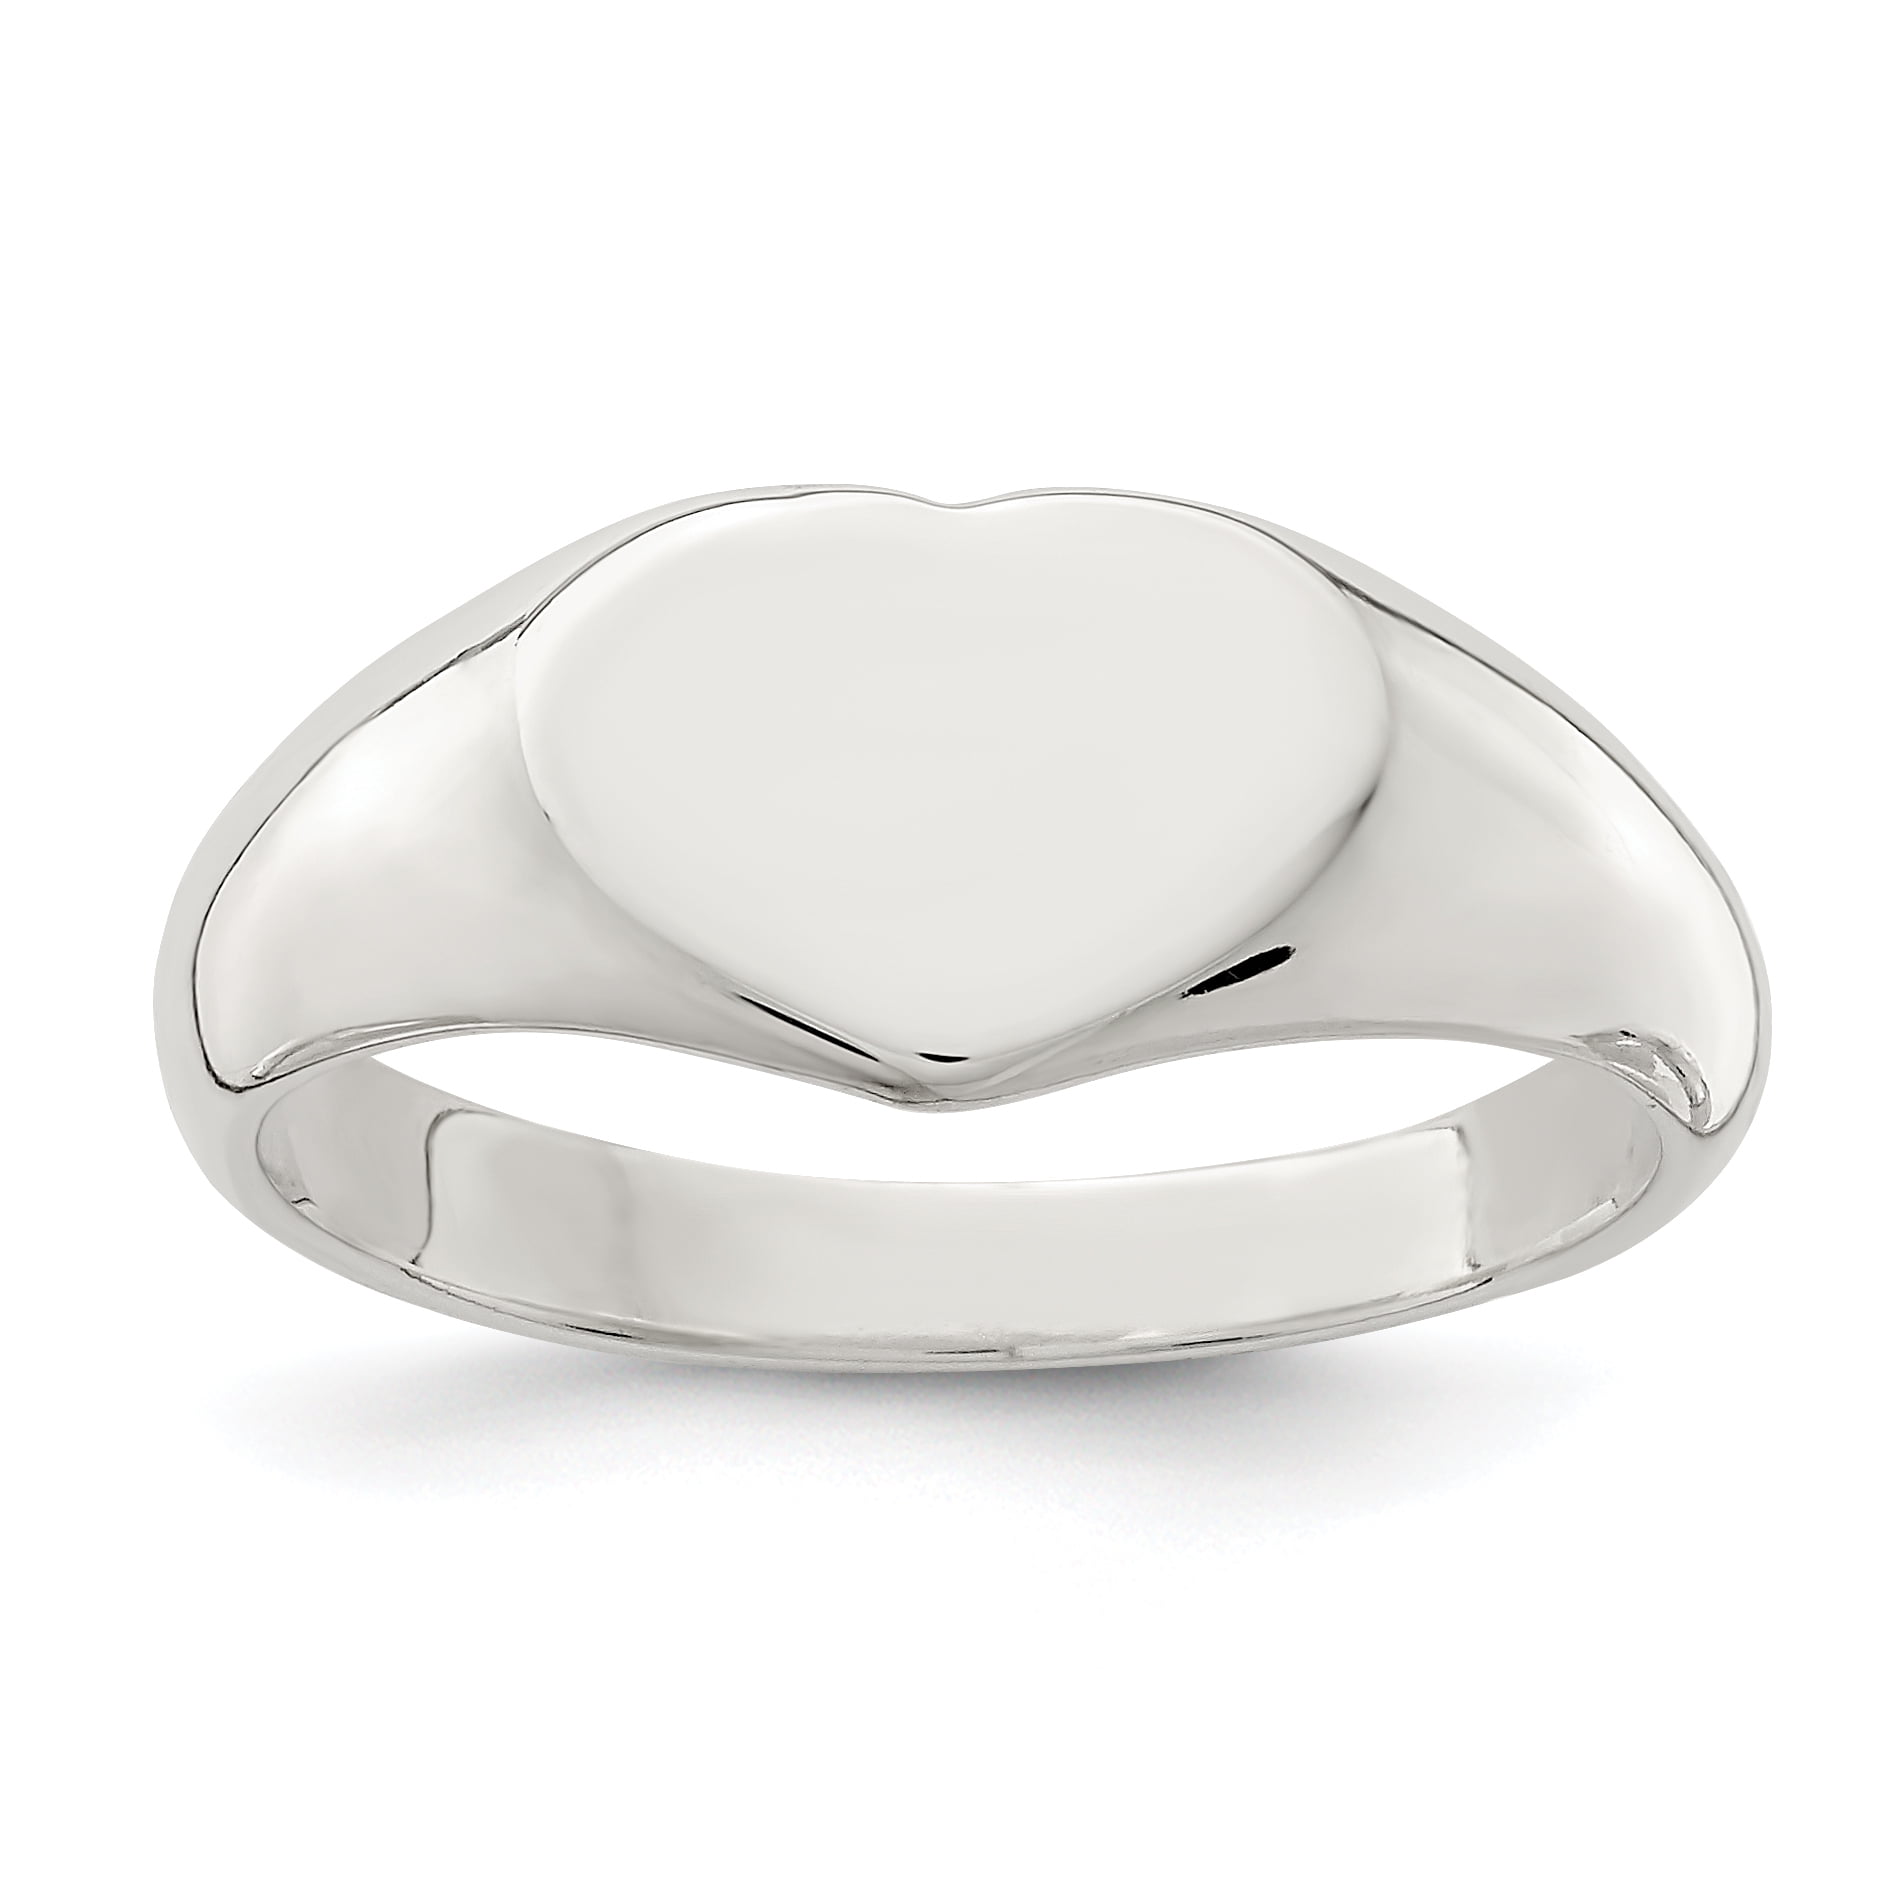 NEW GENUINE STERLING SILVER 925 HEART SIGNET RING CHOOSE YOUR SIZE & GEMSTONE